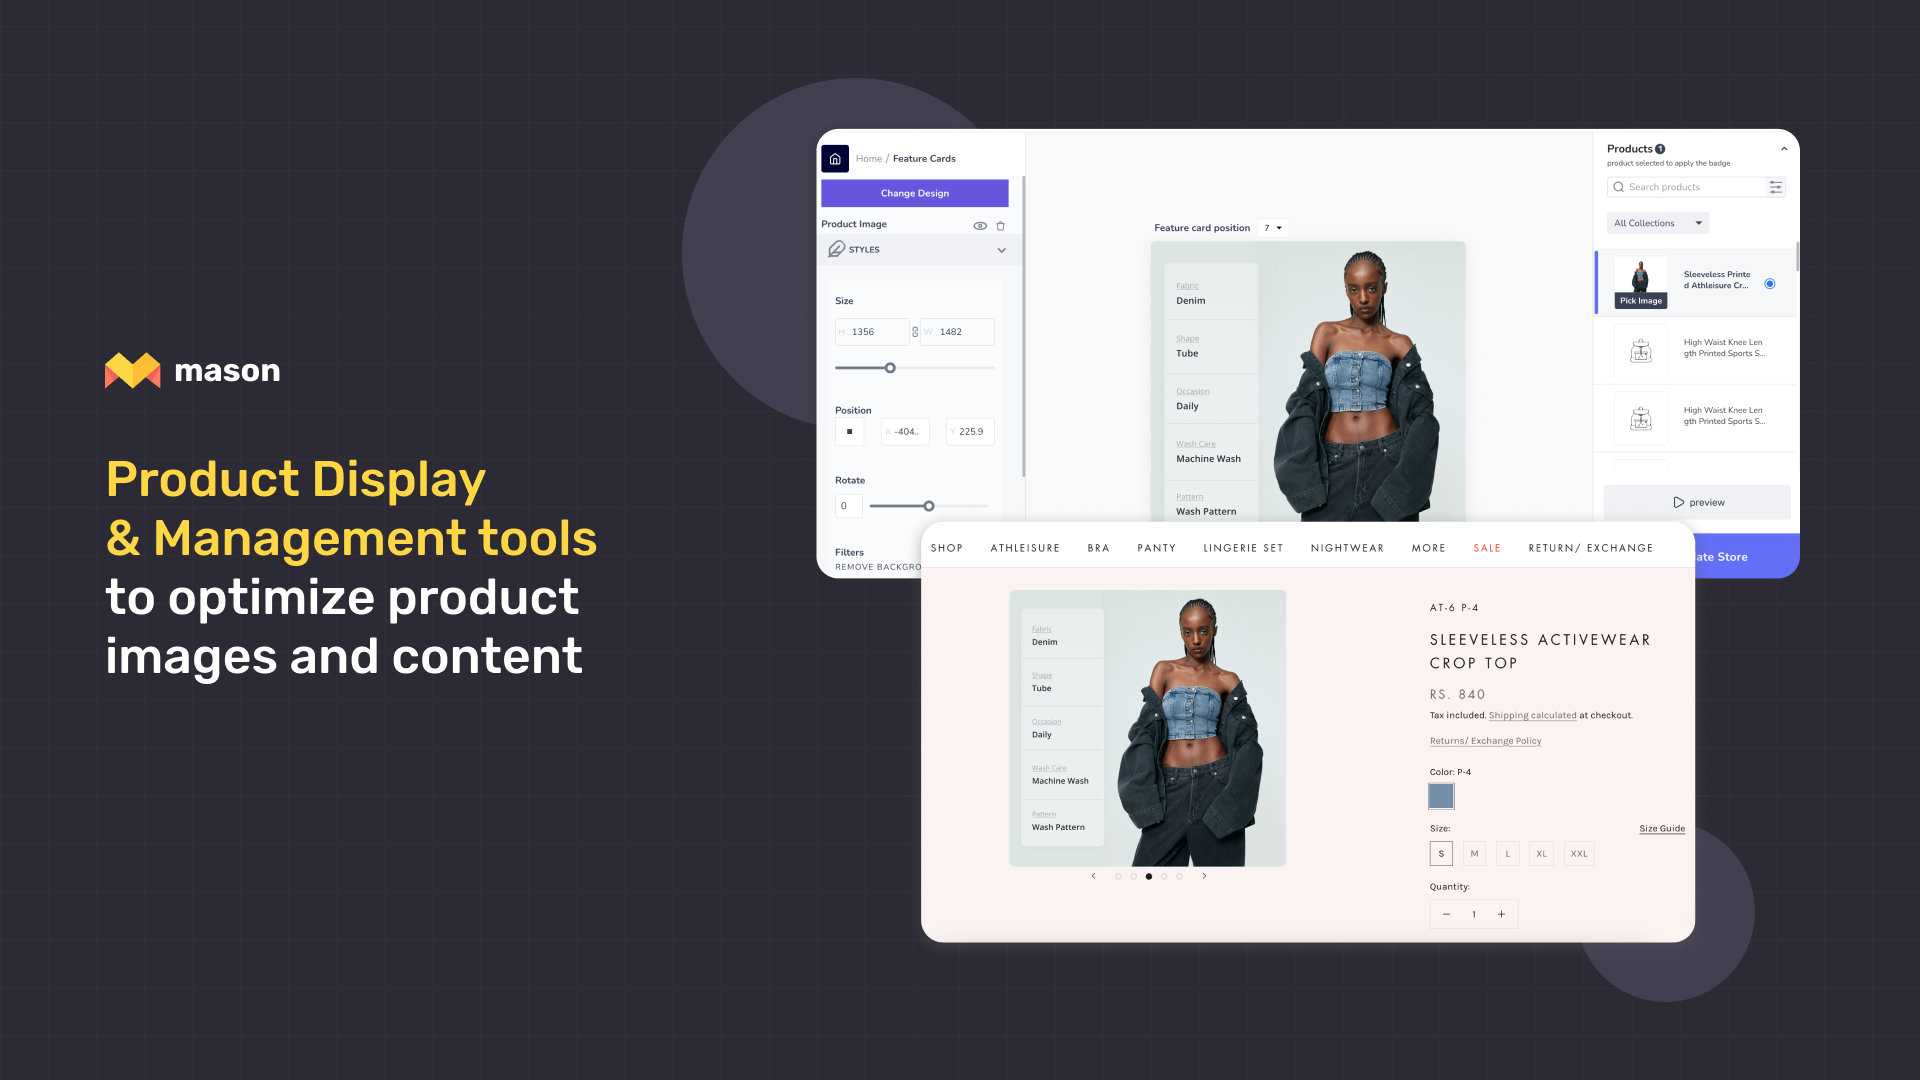 Product Display & Management tools to optimize product images and content